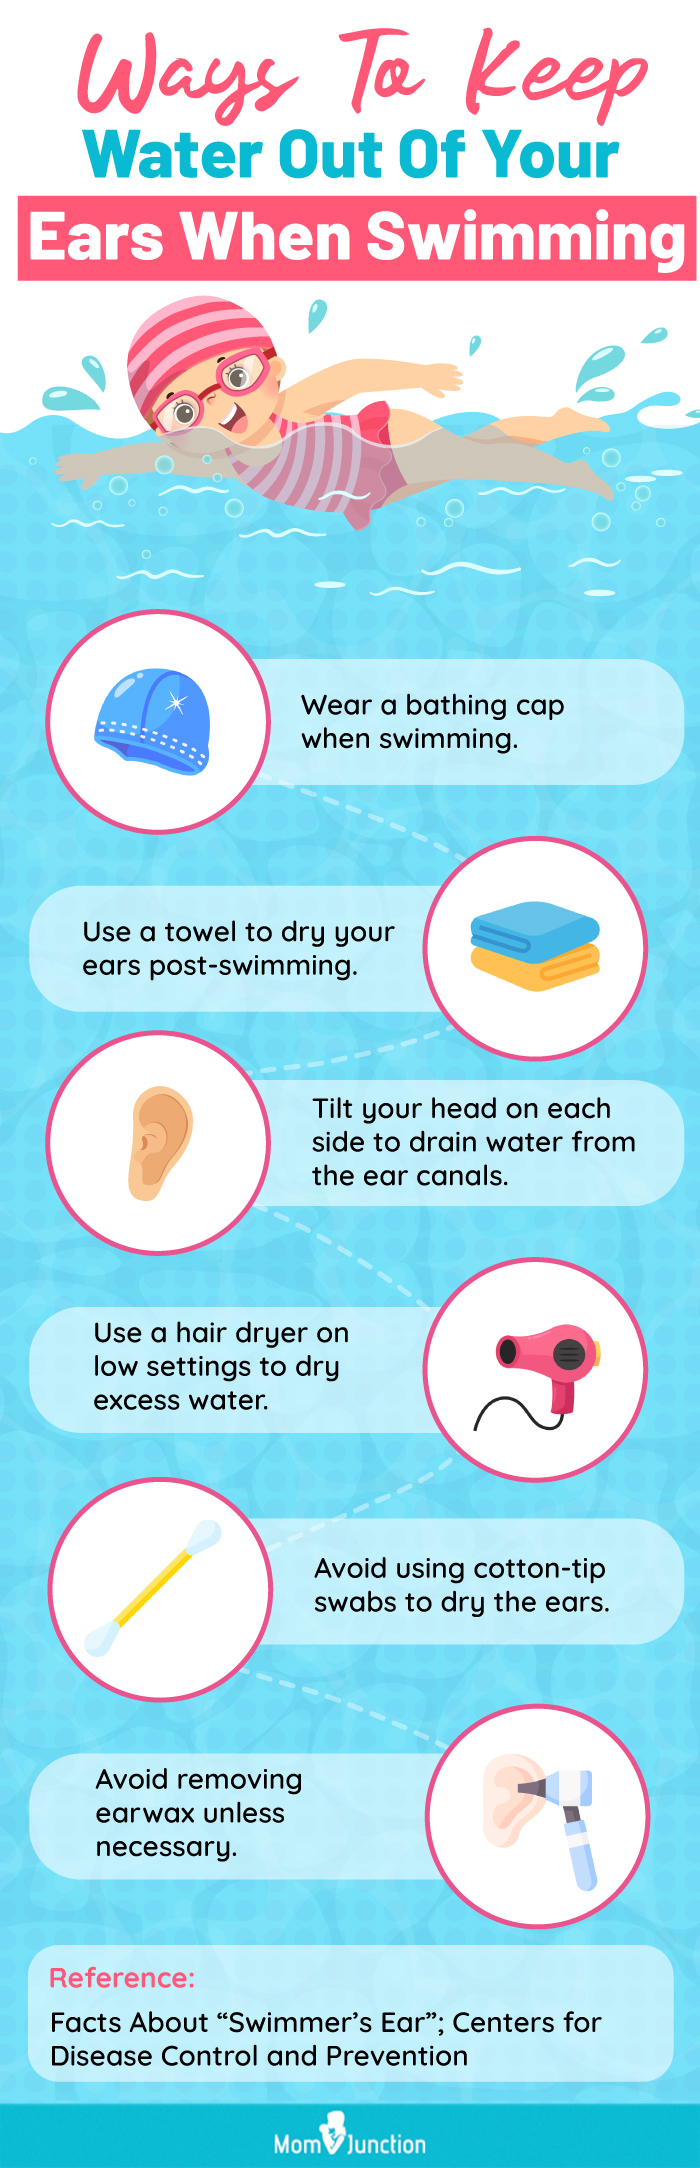 Ways To Keep Water Out Of Your Ears When Swimming (infographic)